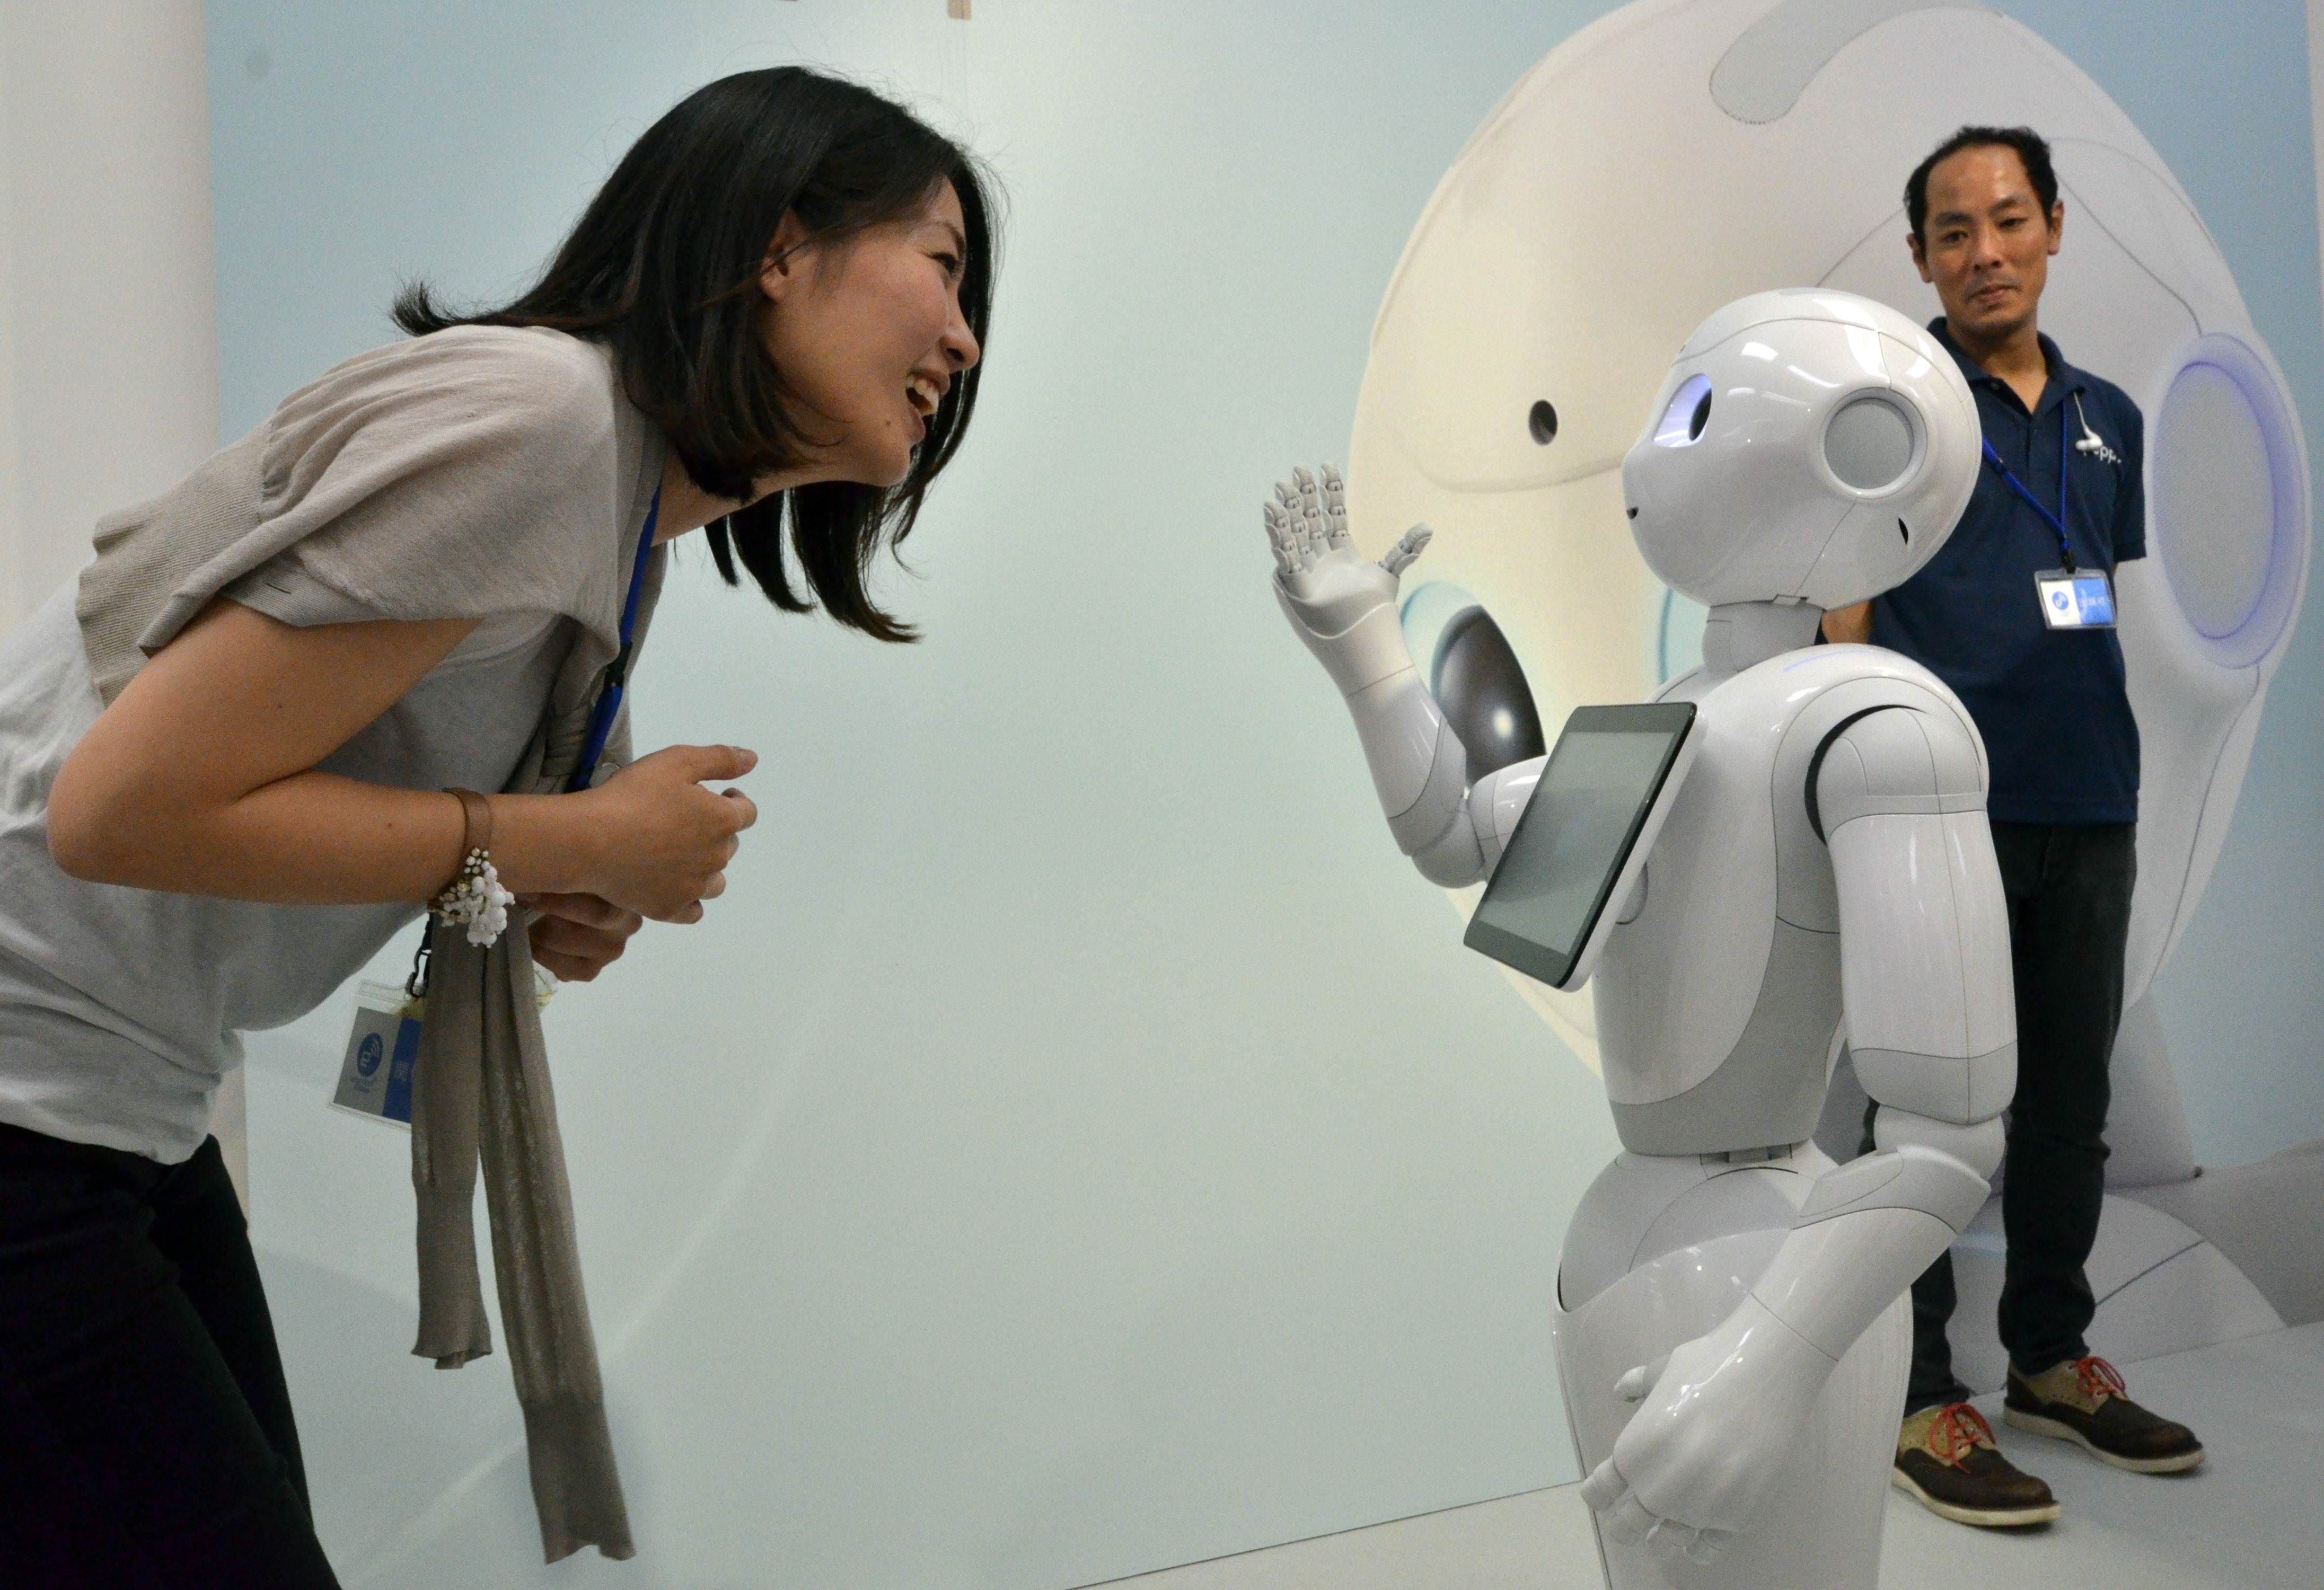 Emotion-reading robot to arrive in stores next year